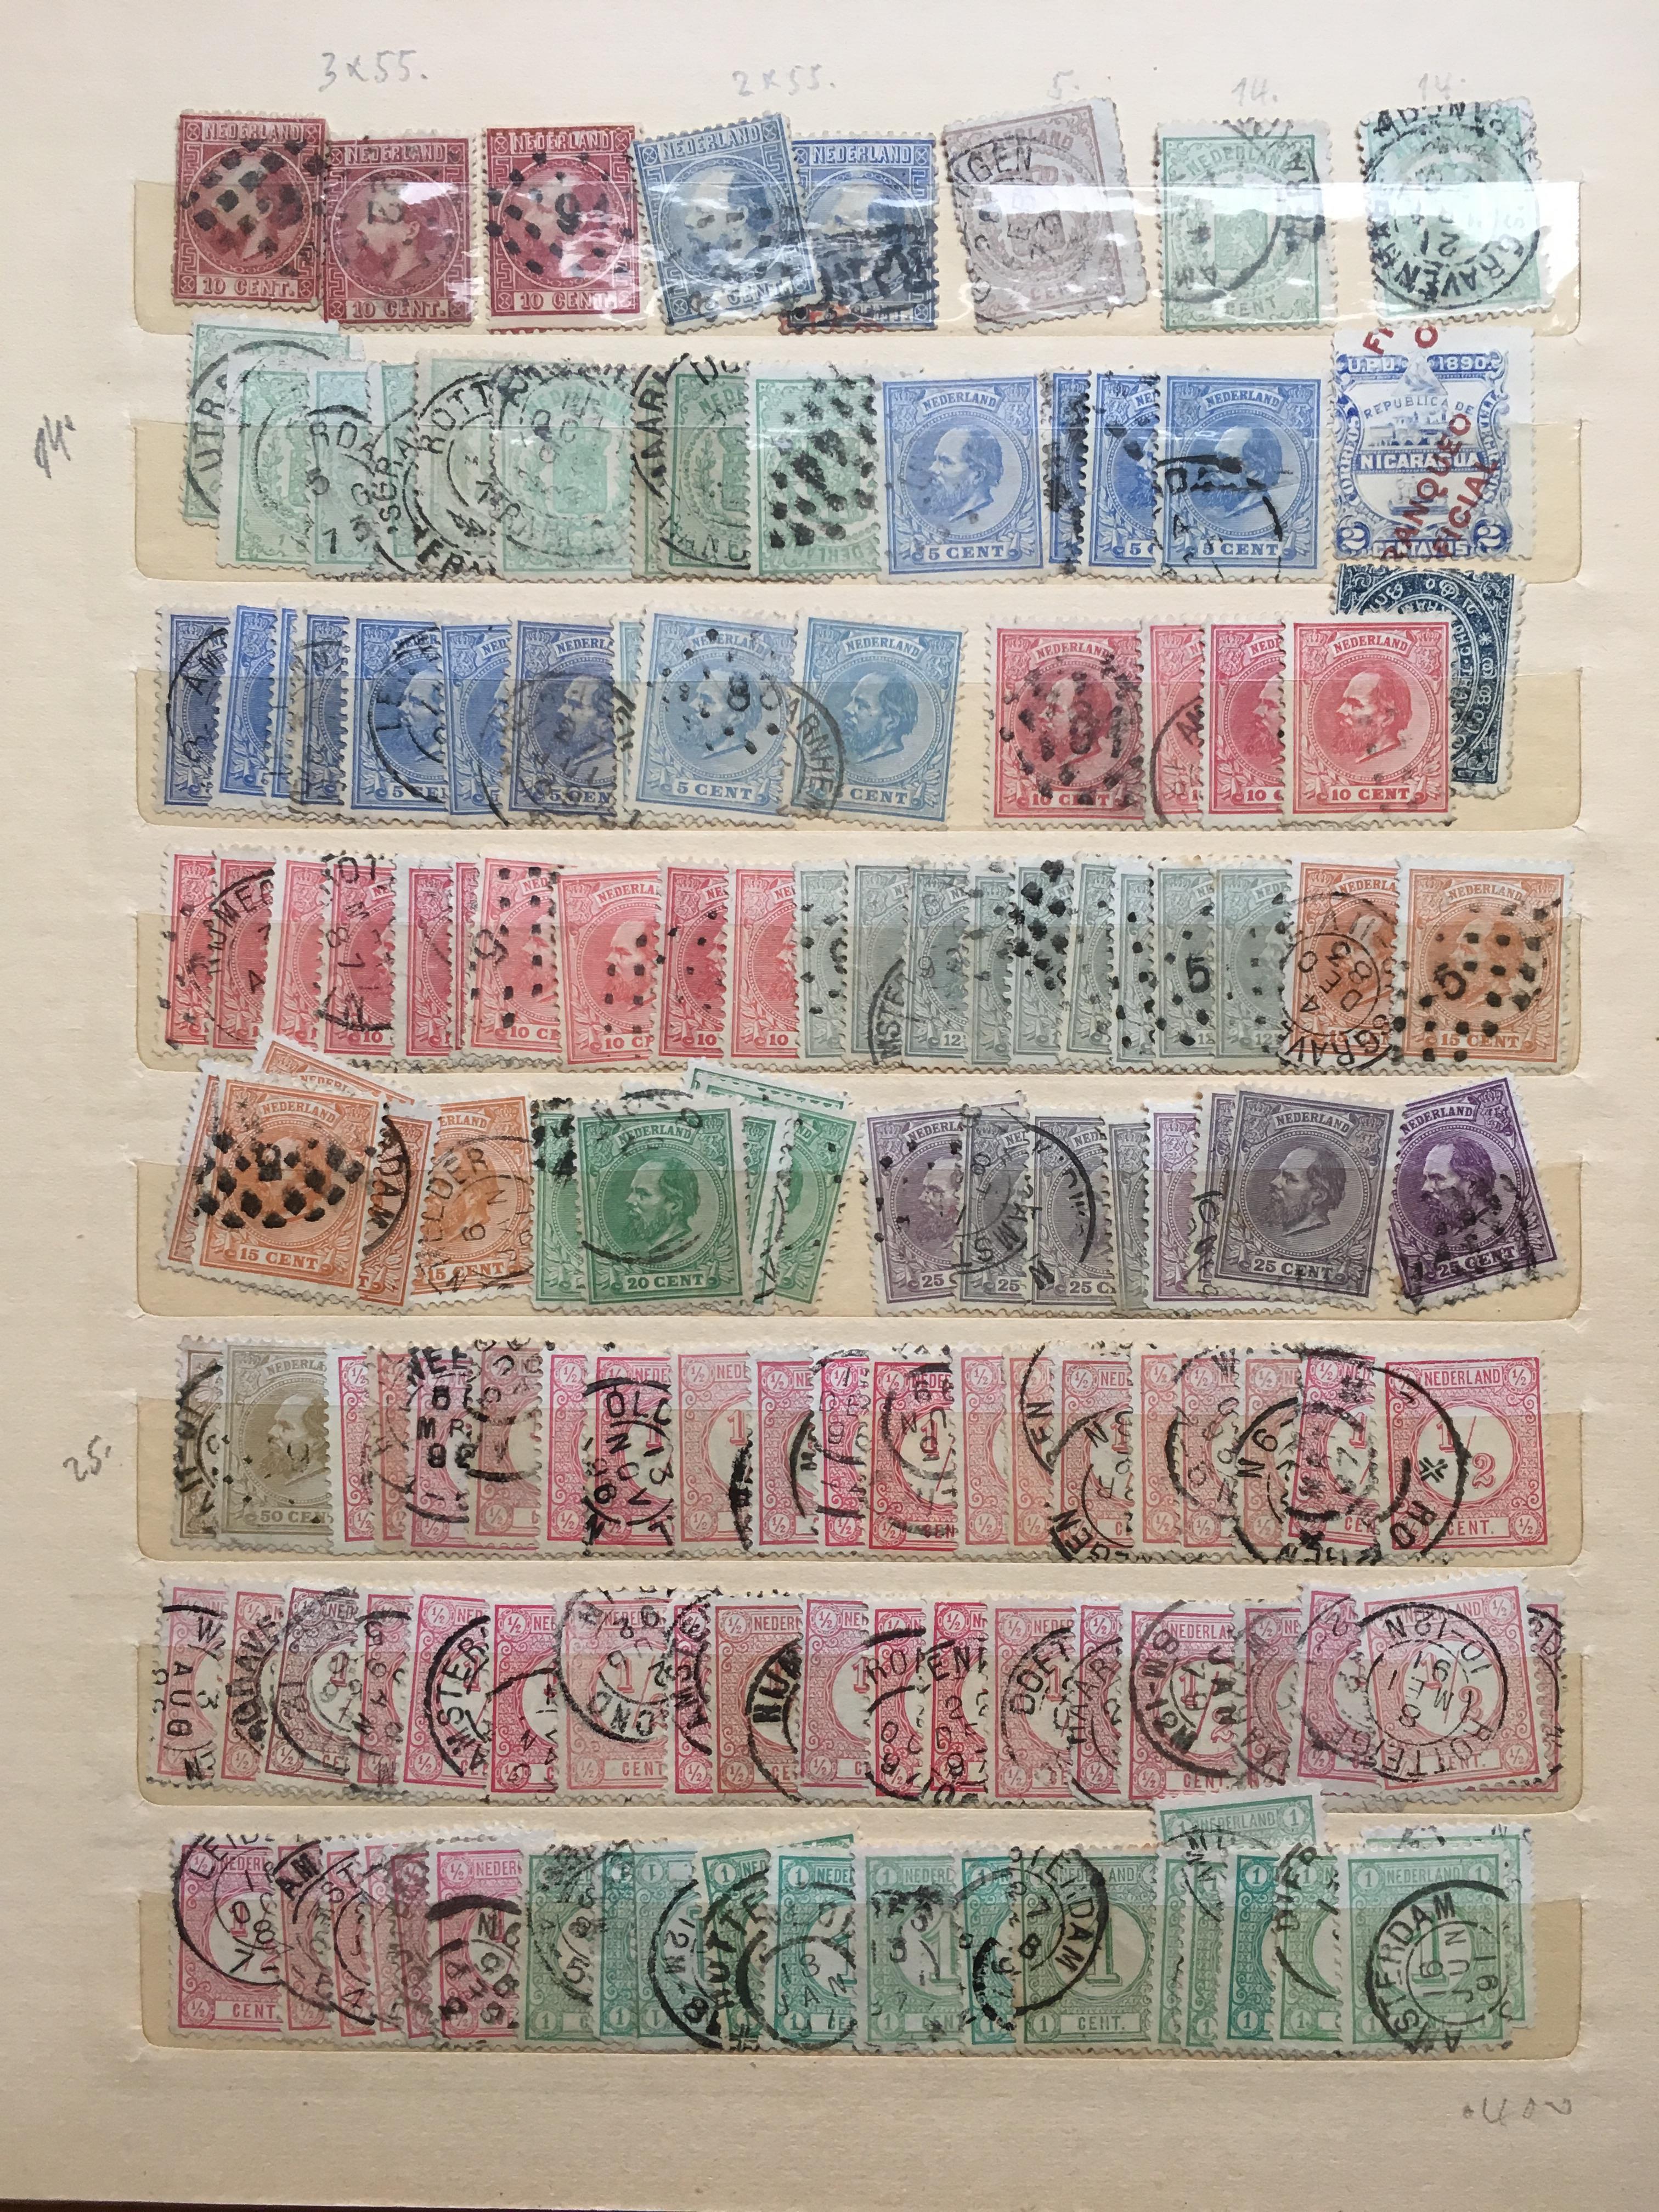 STAMPS: EUROPEAN IN EIGHT VOLUMES, FRANCE, LUXEMBOURG, NORWAY, NETHERLANDS, MINT RUSSIA, - Image 12 of 32